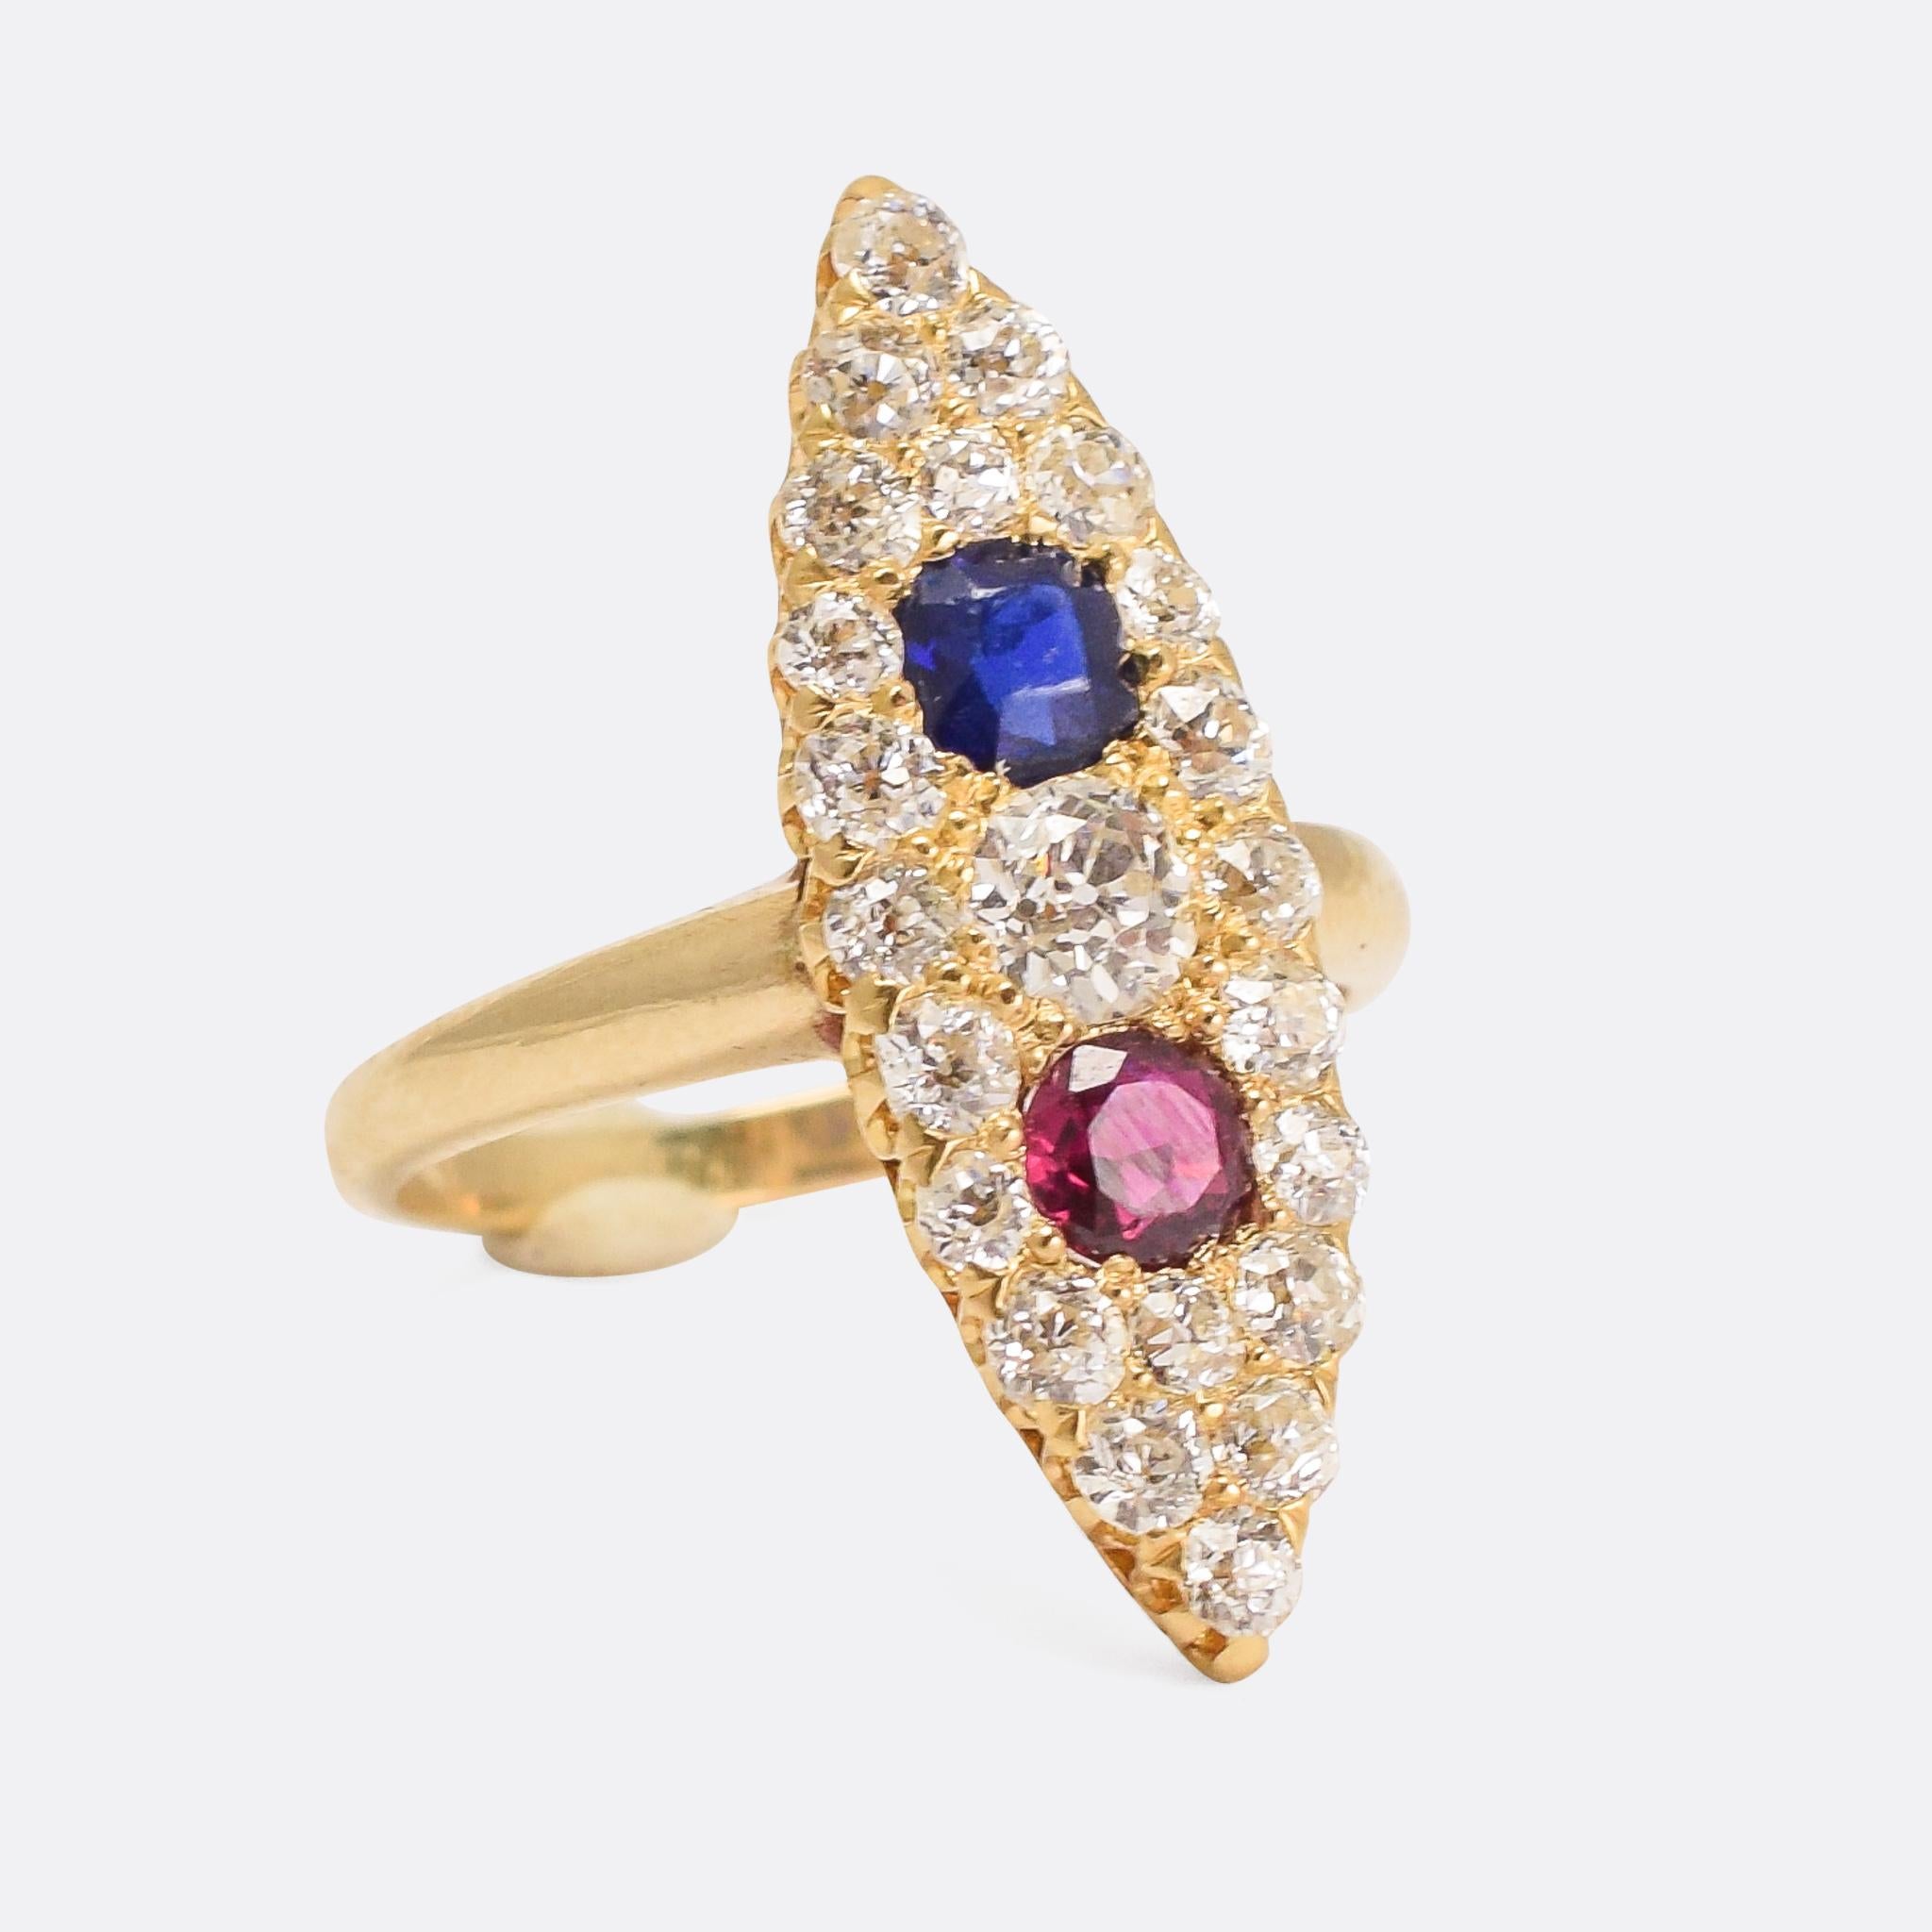 A spectacular Victorian Marquise Cluster Ring, pavé set with diamonds around a blue sapphire and a ruby. With an openworked claw gallery, and simple gold band, it's a gorgeously styled antique ring - very typically late Victorian. Modelled in 18k